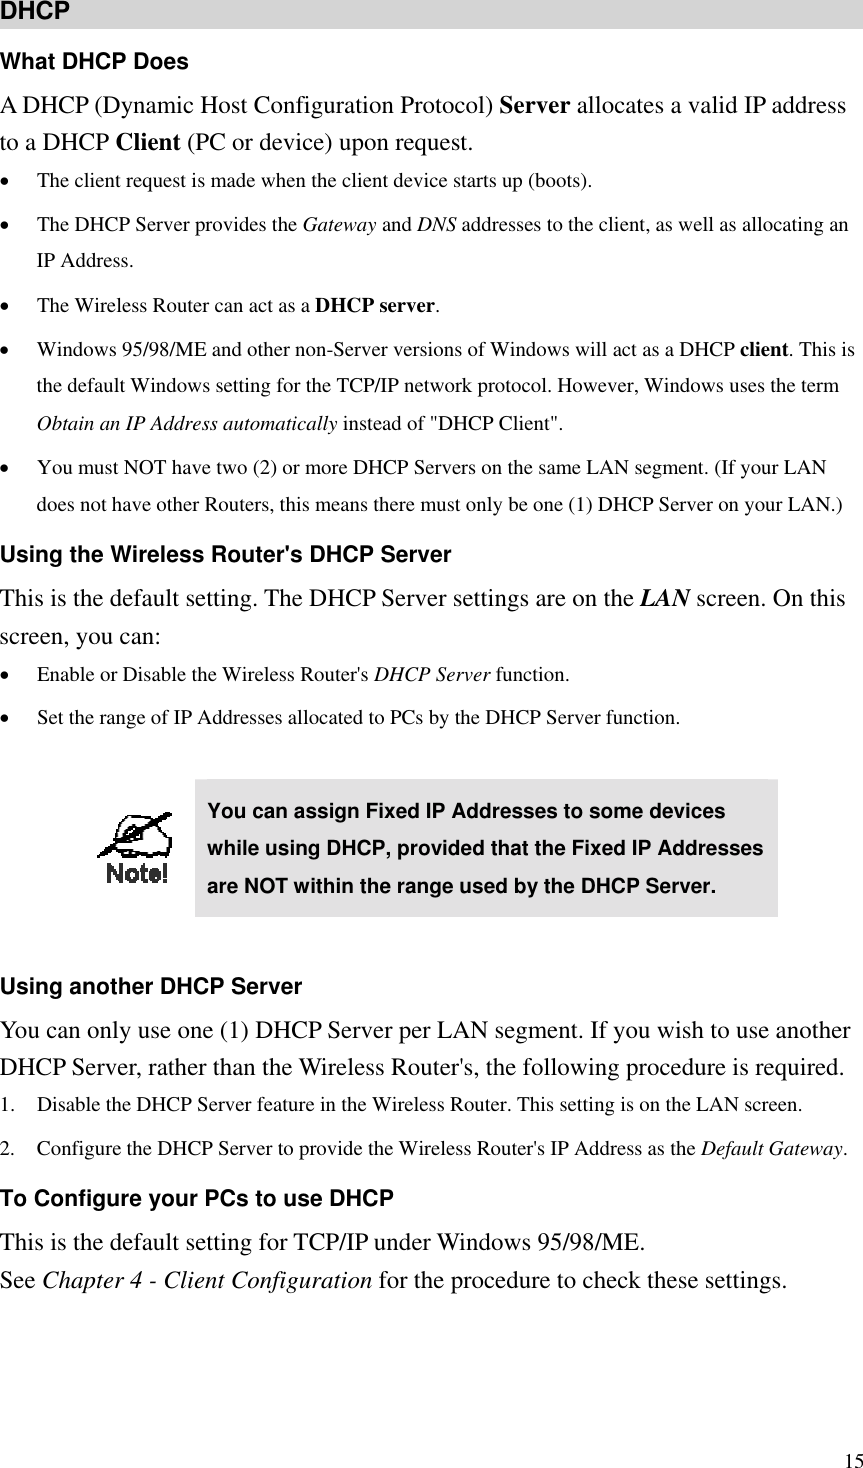 DHCP What DHCP Does A DHCP (Dynamic Host Configuration Protocol) Server allocates a valid IP address to a DHCP Client (PC or device) upon request. •  The client request is made when the client device starts up (boots). •  The DHCP Server provides the Gateway and DNS addresses to the client, as well as allocating an IP Address. •  The Wireless Router can act as a DHCP server. •  Windows 95/98/ME and other non-Server versions of Windows will act as a DHCP client. This is the default Windows setting for the TCP/IP network protocol. However, Windows uses the term Obtain an IP Address automatically instead of &quot;DHCP Client&quot;. •  You must NOT have two (2) or more DHCP Servers on the same LAN segment. (If your LAN does not have other Routers, this means there must only be one (1) DHCP Server on your LAN.) Using the Wireless Router&apos;s DHCP Server This is the default setting. The DHCP Server settings are on the LAN screen. On this screen, you can: •  Enable or Disable the Wireless Router&apos;s DHCP Server function. •  Set the range of IP Addresses allocated to PCs by the DHCP Server function.   You can assign Fixed IP Addresses to some devices while using DHCP, provided that the Fixed IP Addresses are NOT within the range used by the DHCP Server.  Using another DHCP Server You can only use one (1) DHCP Server per LAN segment. If you wish to use another DHCP Server, rather than the Wireless Router&apos;s, the following procedure is required. 1.  Disable the DHCP Server feature in the Wireless Router. This setting is on the LAN screen. 2.  Configure the DHCP Server to provide the Wireless Router&apos;s IP Address as the Default Gateway. To Configure your PCs to use DHCP This is the default setting for TCP/IP under Windows 95/98/ME.   See Chapter 4 - Client Configuration for the procedure to check these settings.    15 